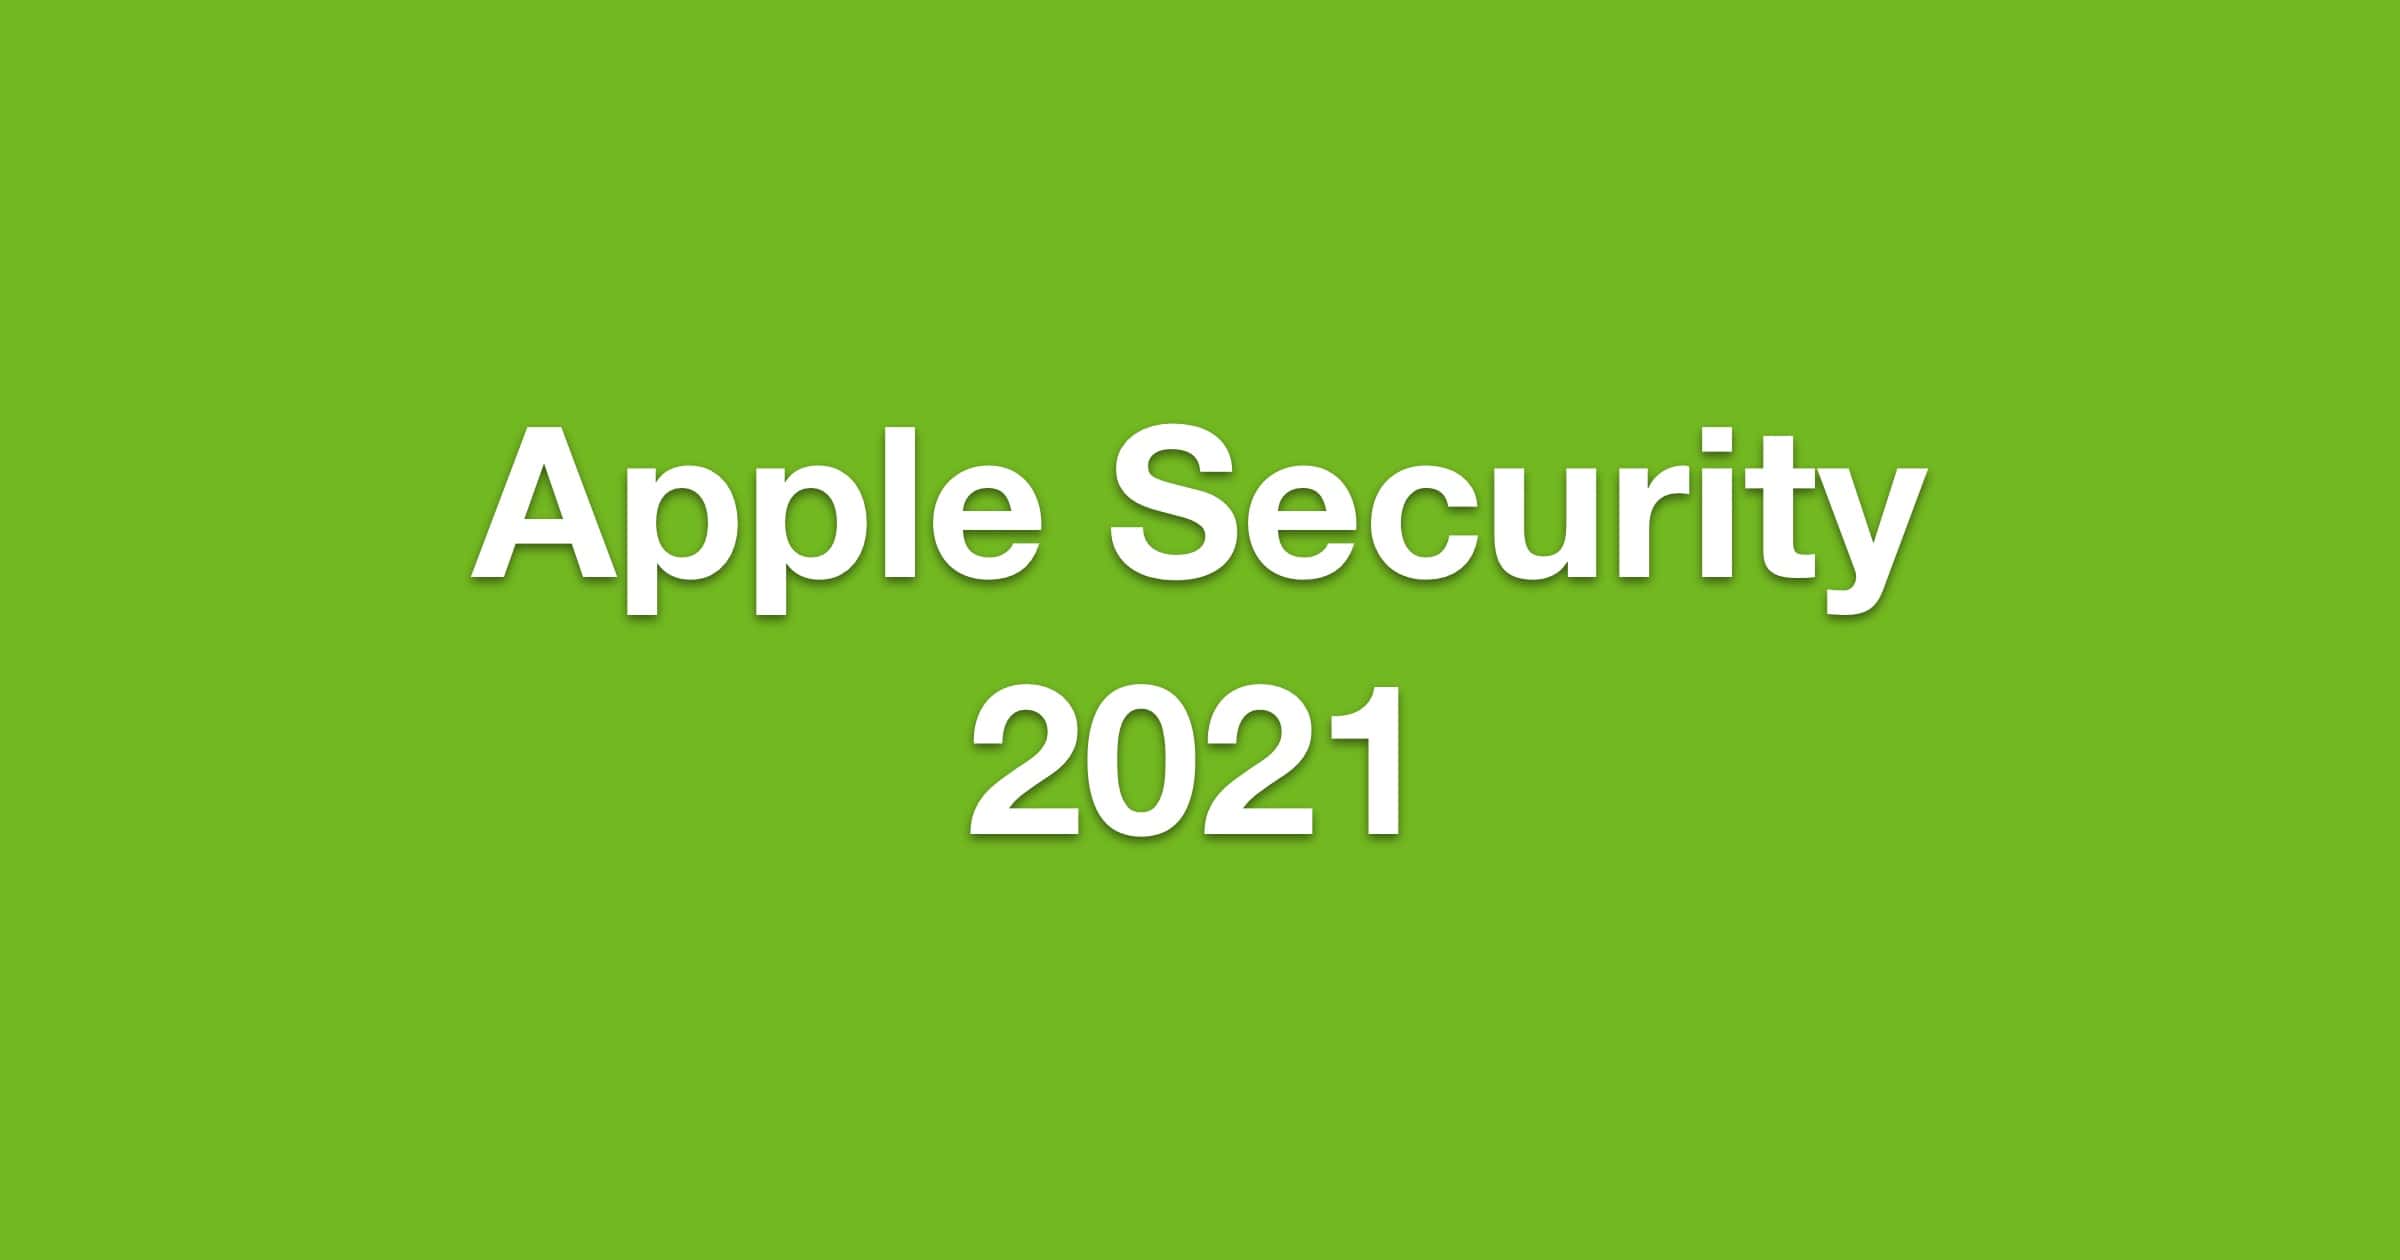 The 2021 Apple Platform Security Guide is Here